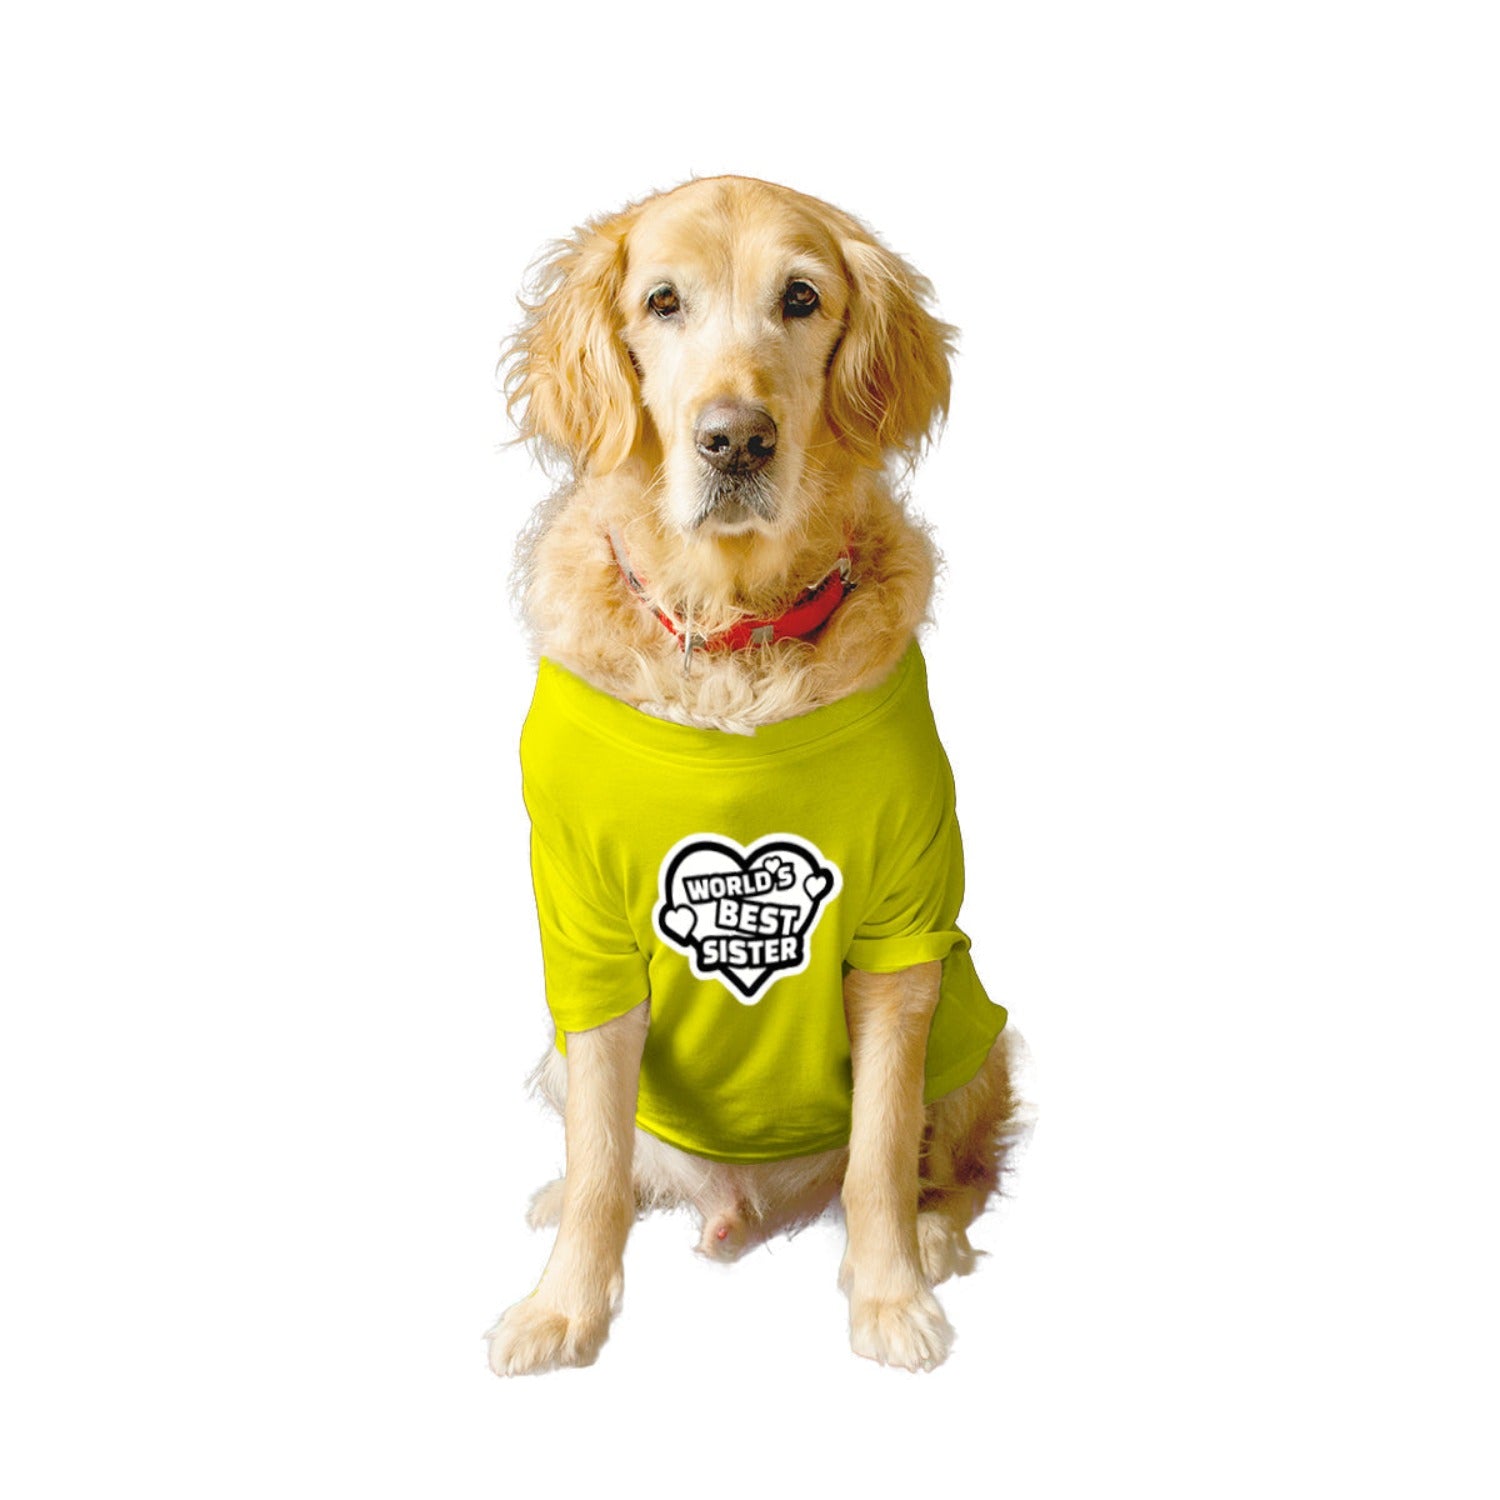 Ruse XX-Small (Chihuahuas, Papillons) / Yellow Ruse Basic Crew Neck "World's Best Sister" Printed Half Sleeves Dog Tee